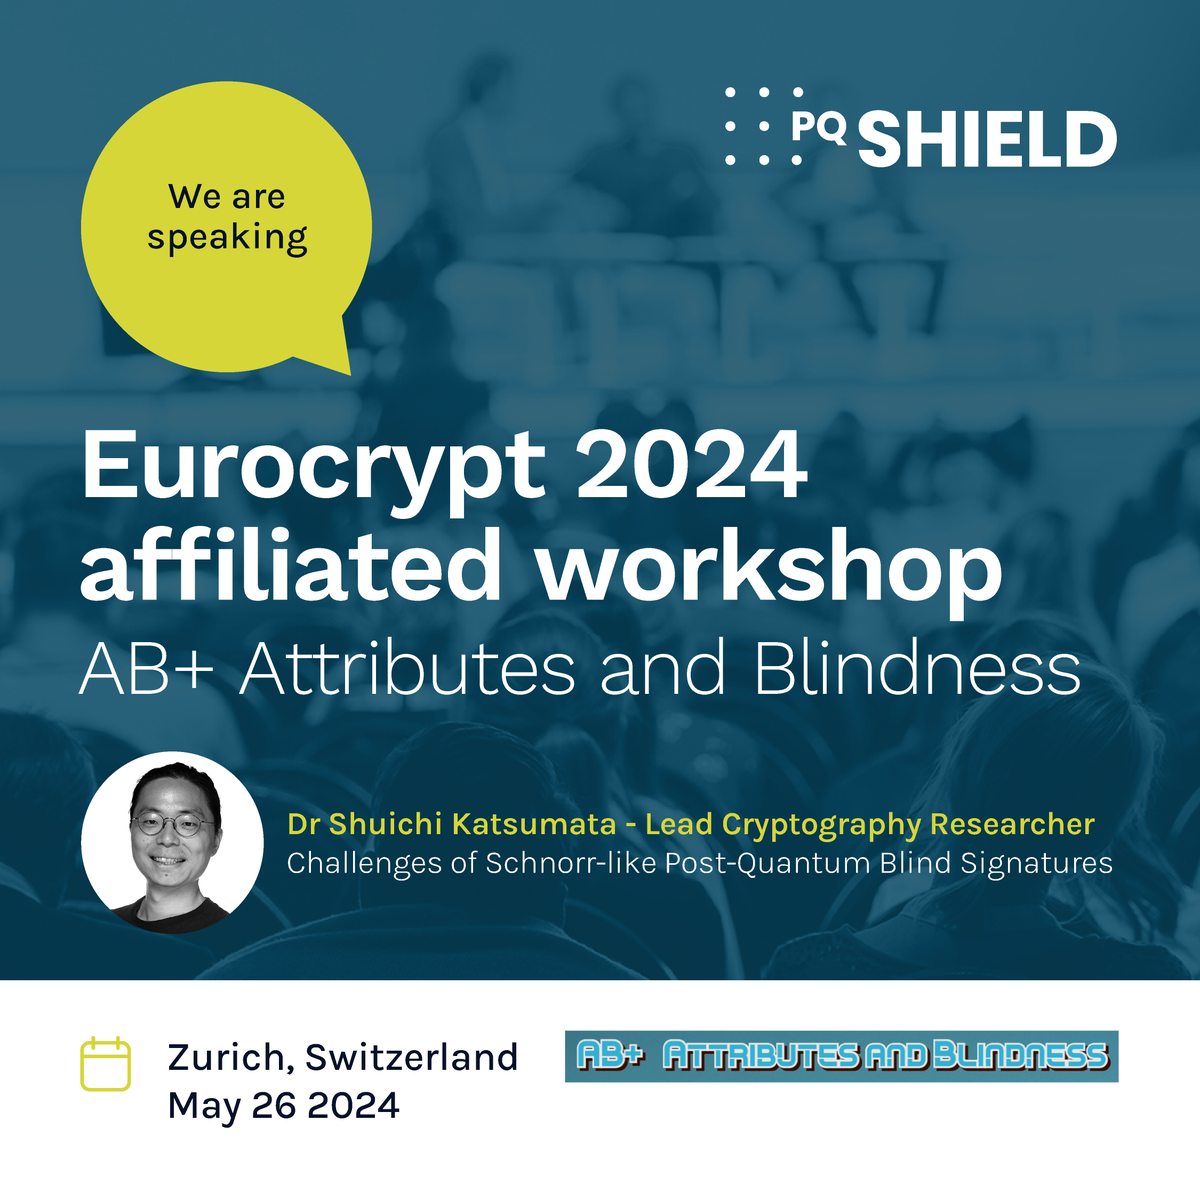 Our Lead Cryptography Researcher Dr Shuichi Katsumata  will be speaking at a Eurocrypt 2024 affiliated workshop on - 'Challenges of Schnorr-like Post-Quantum Blind Signatures' on May 26th in Zurich. #cryptography #eurocrypt2024